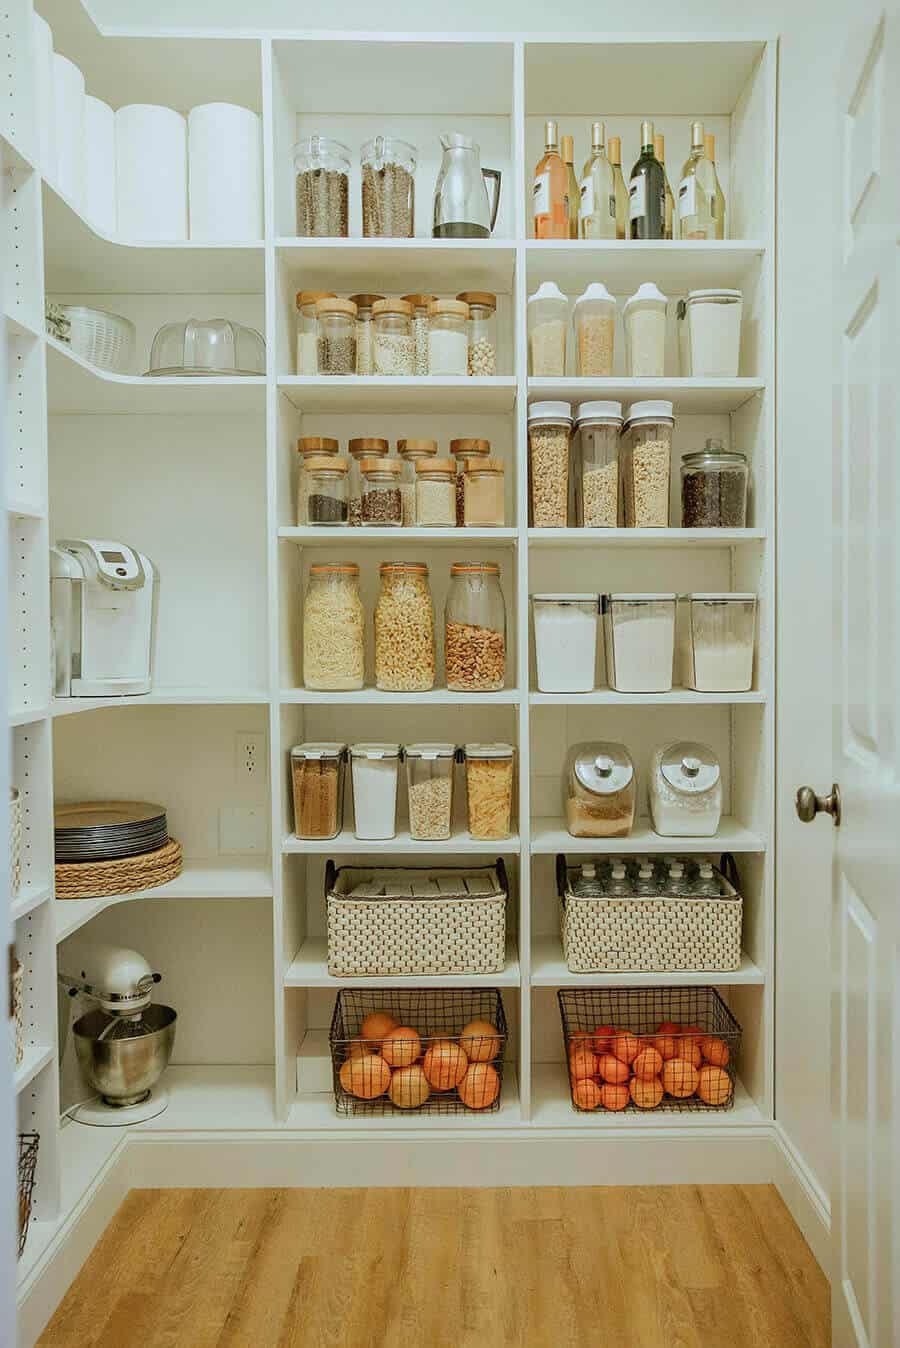 There are many ways to adapt the kitchen pantry closet design ideas to your organizing needs. All you need is to see the ideas we are about to show you, and you will be set for having the best pantry you know you need and deserve.